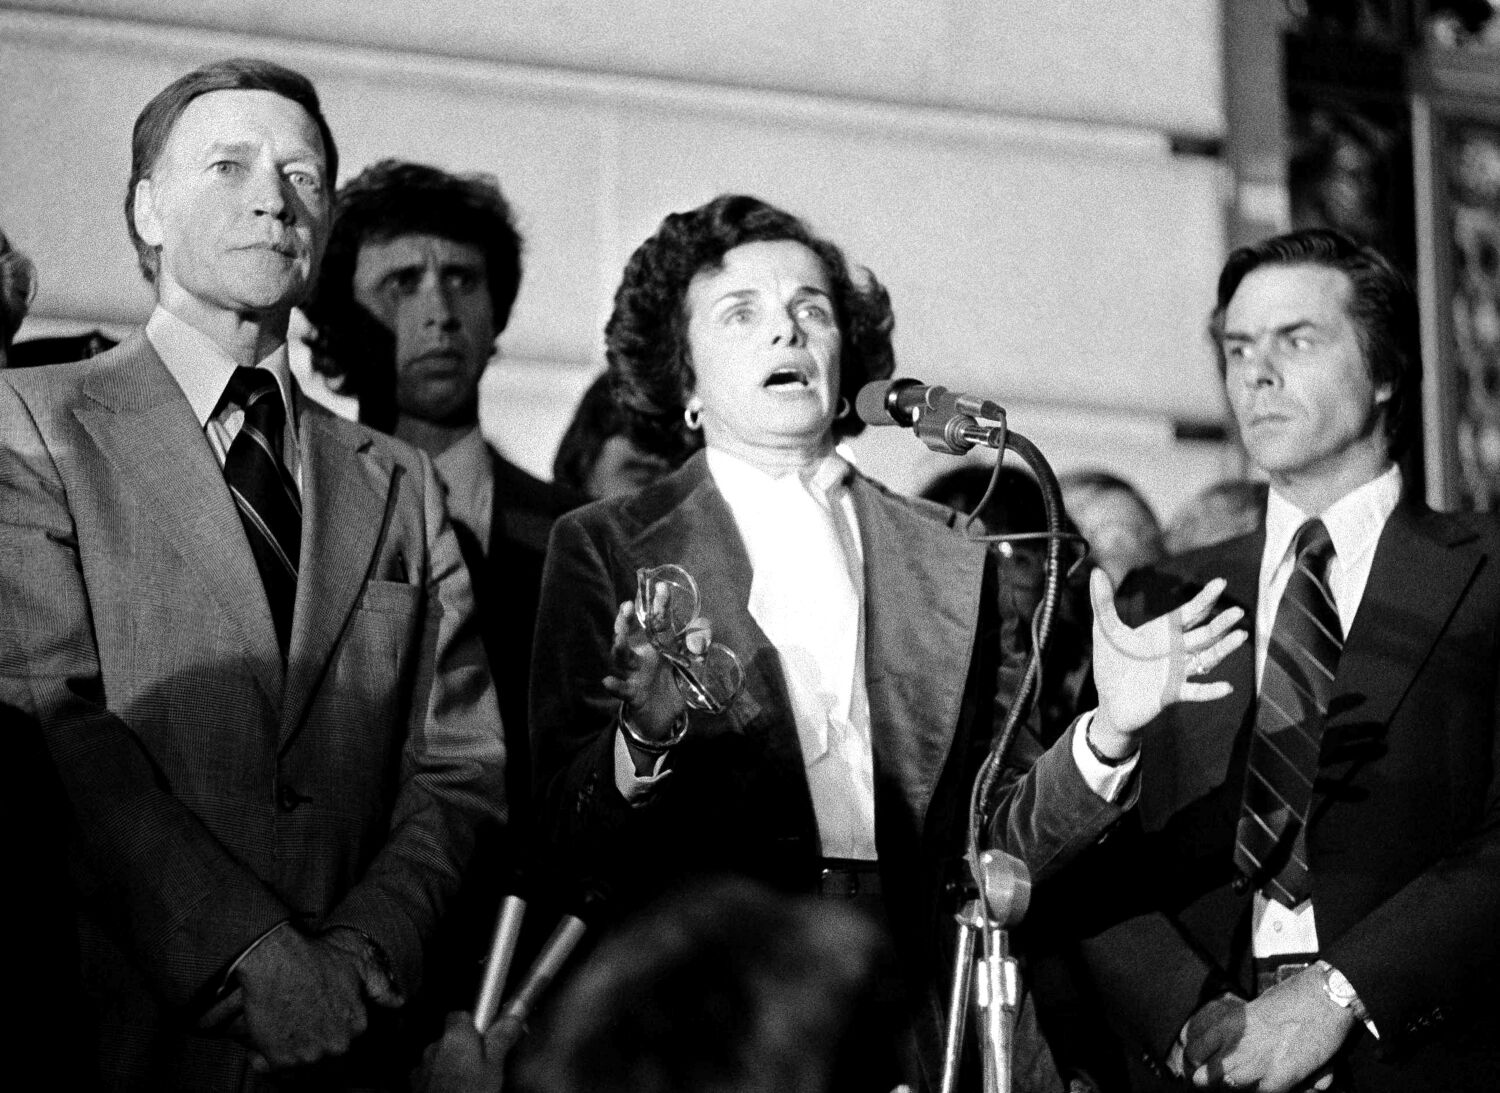 The shocking San Francisco assassinations that forged Feinstein's political path